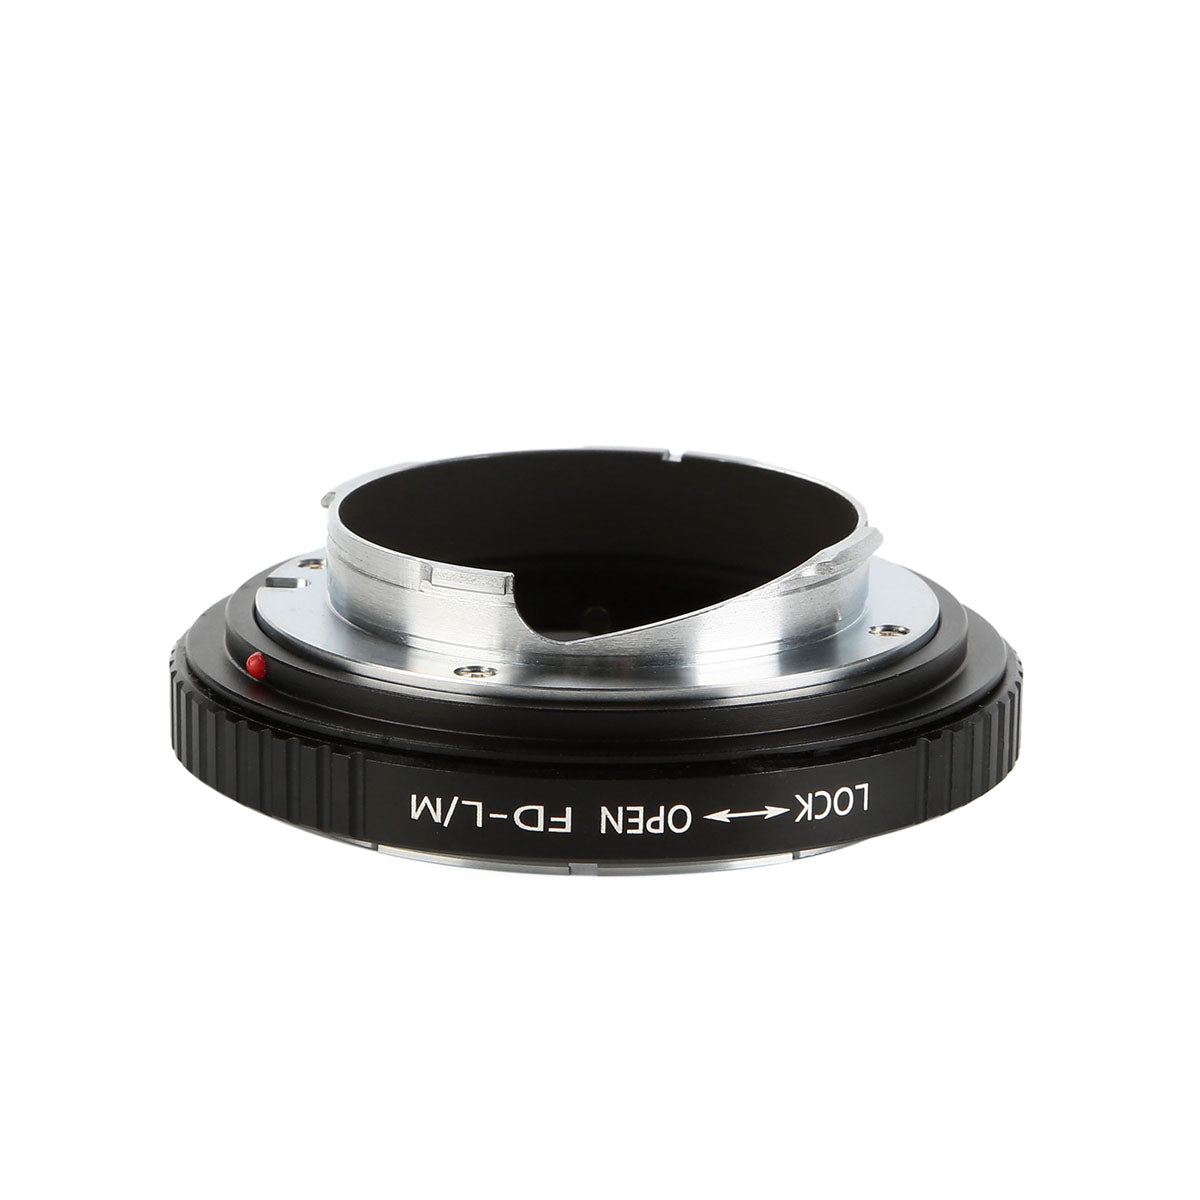 K&F CONCEPT Canon FD-LM Leica M Lens mount adapter